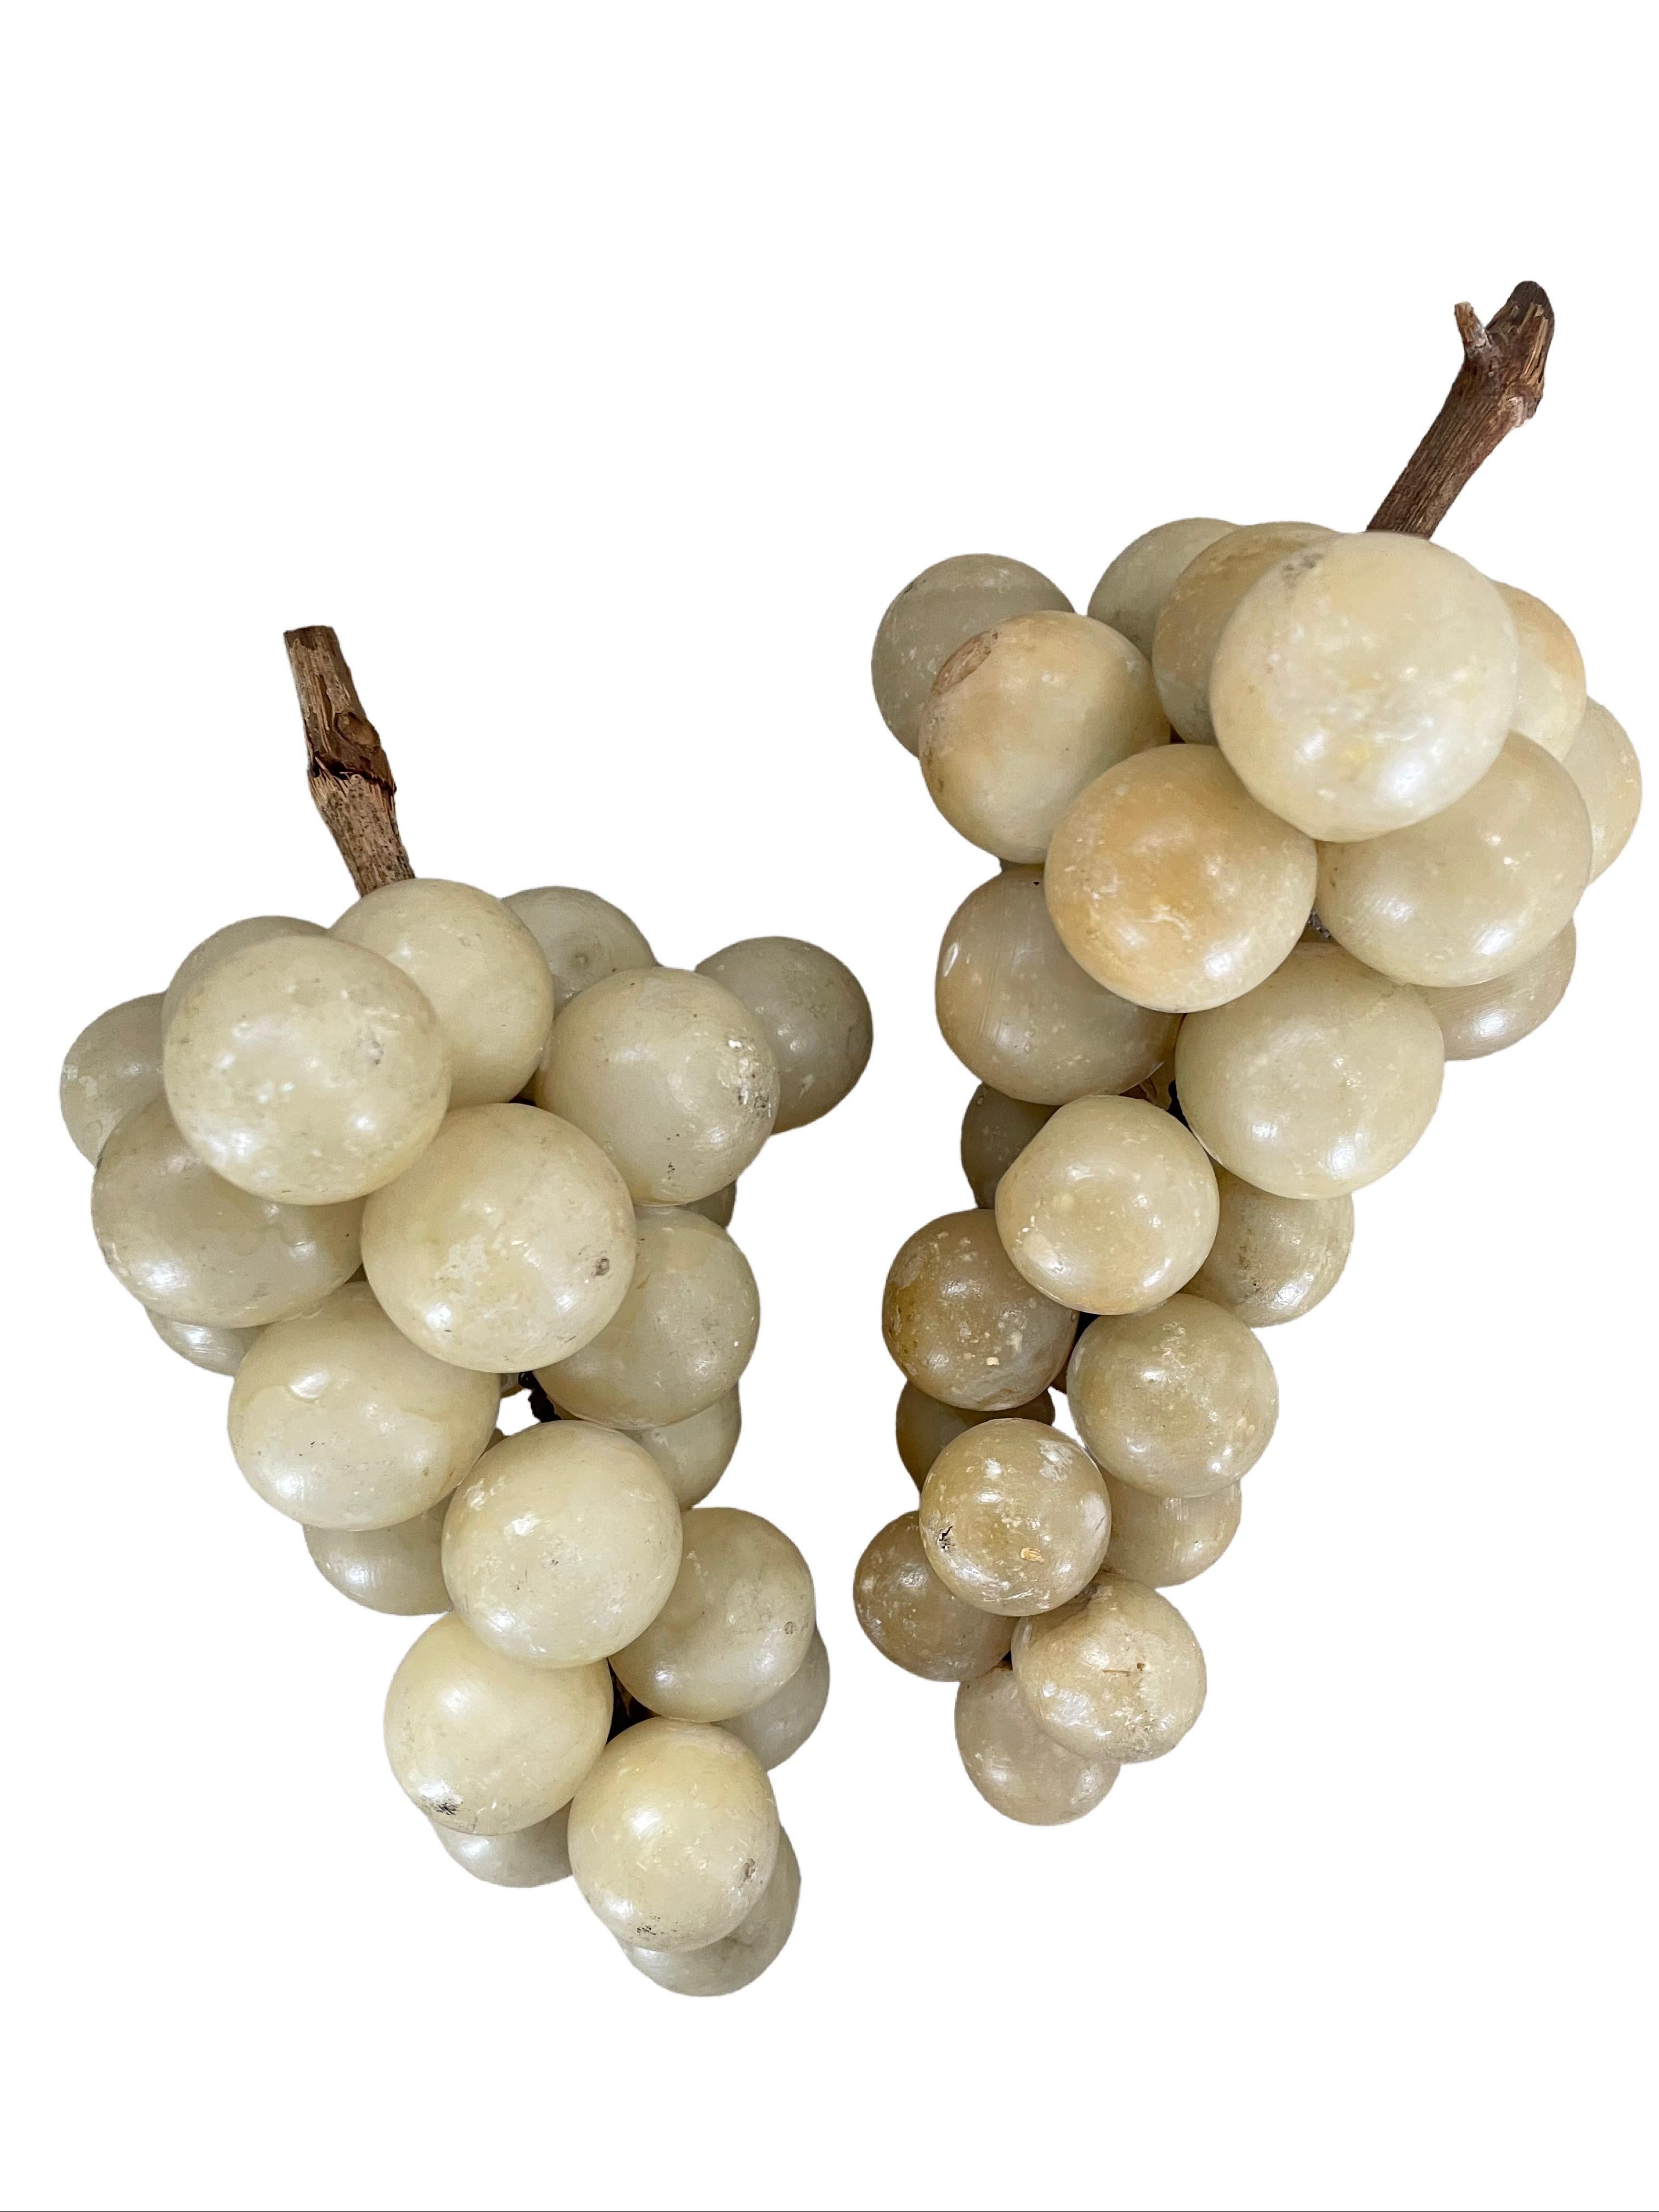 giant cluster of grapes